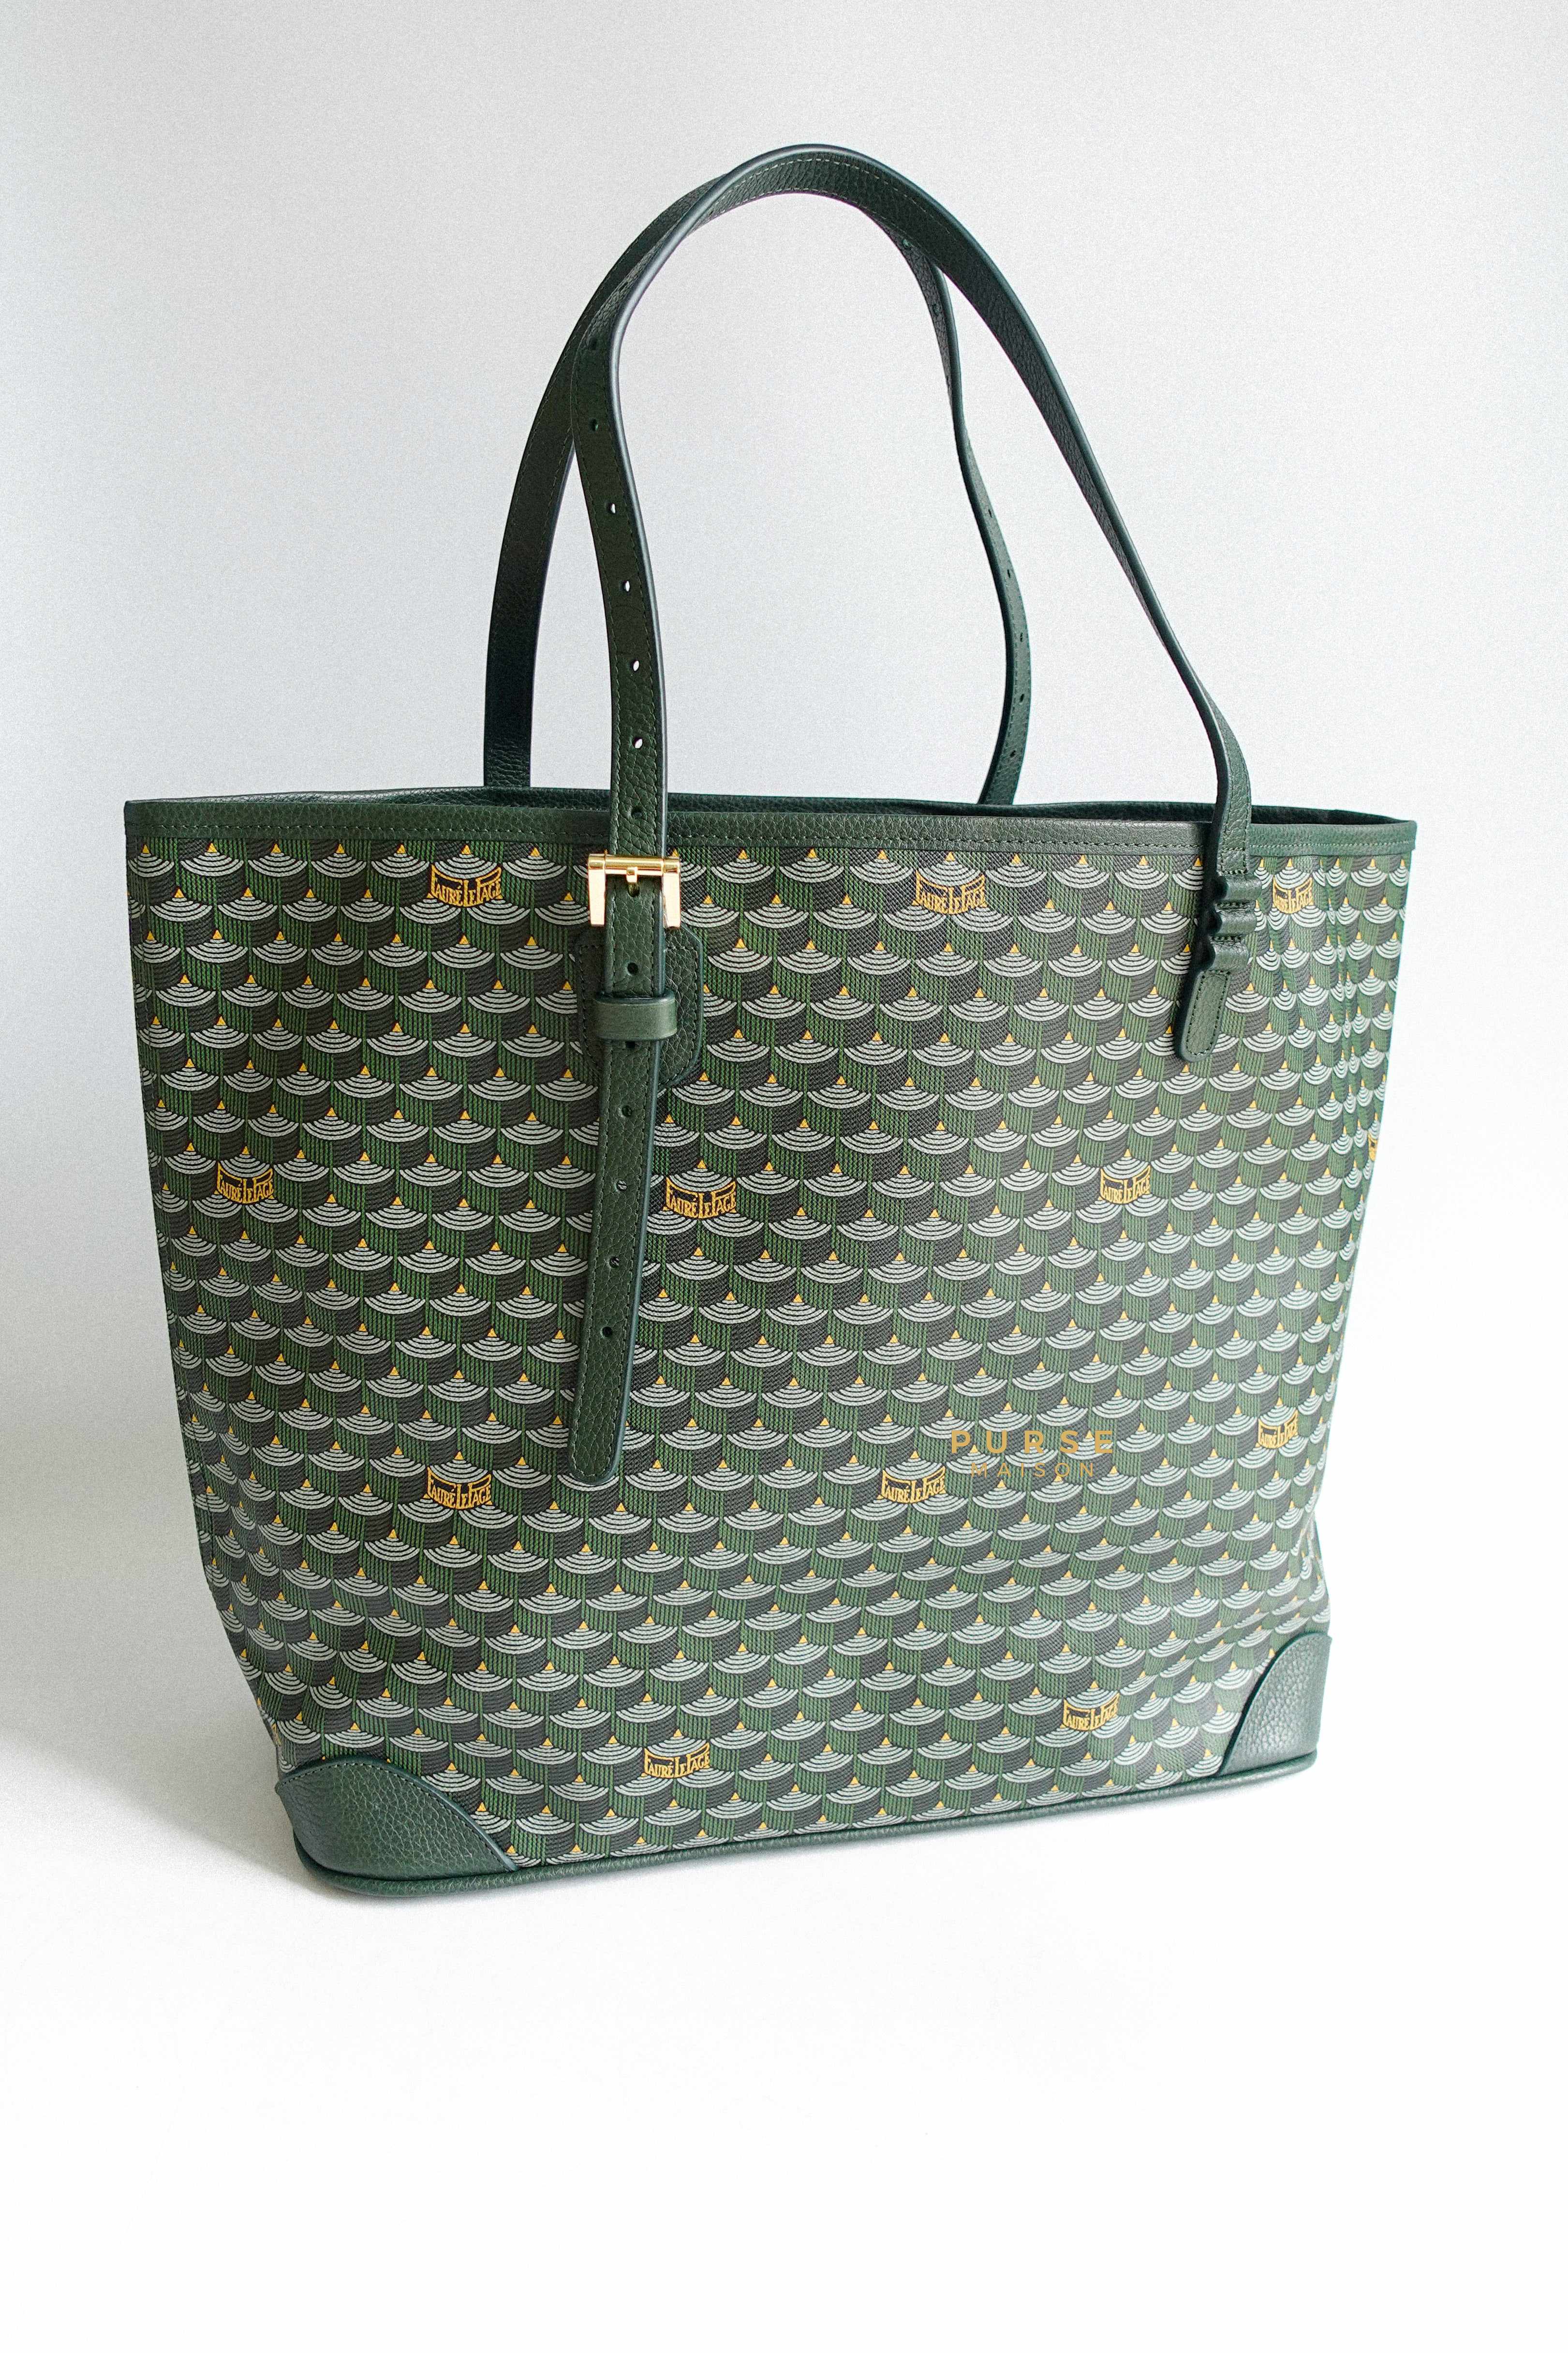 Fauré Le Page Daily Battle 35 Tote in Green